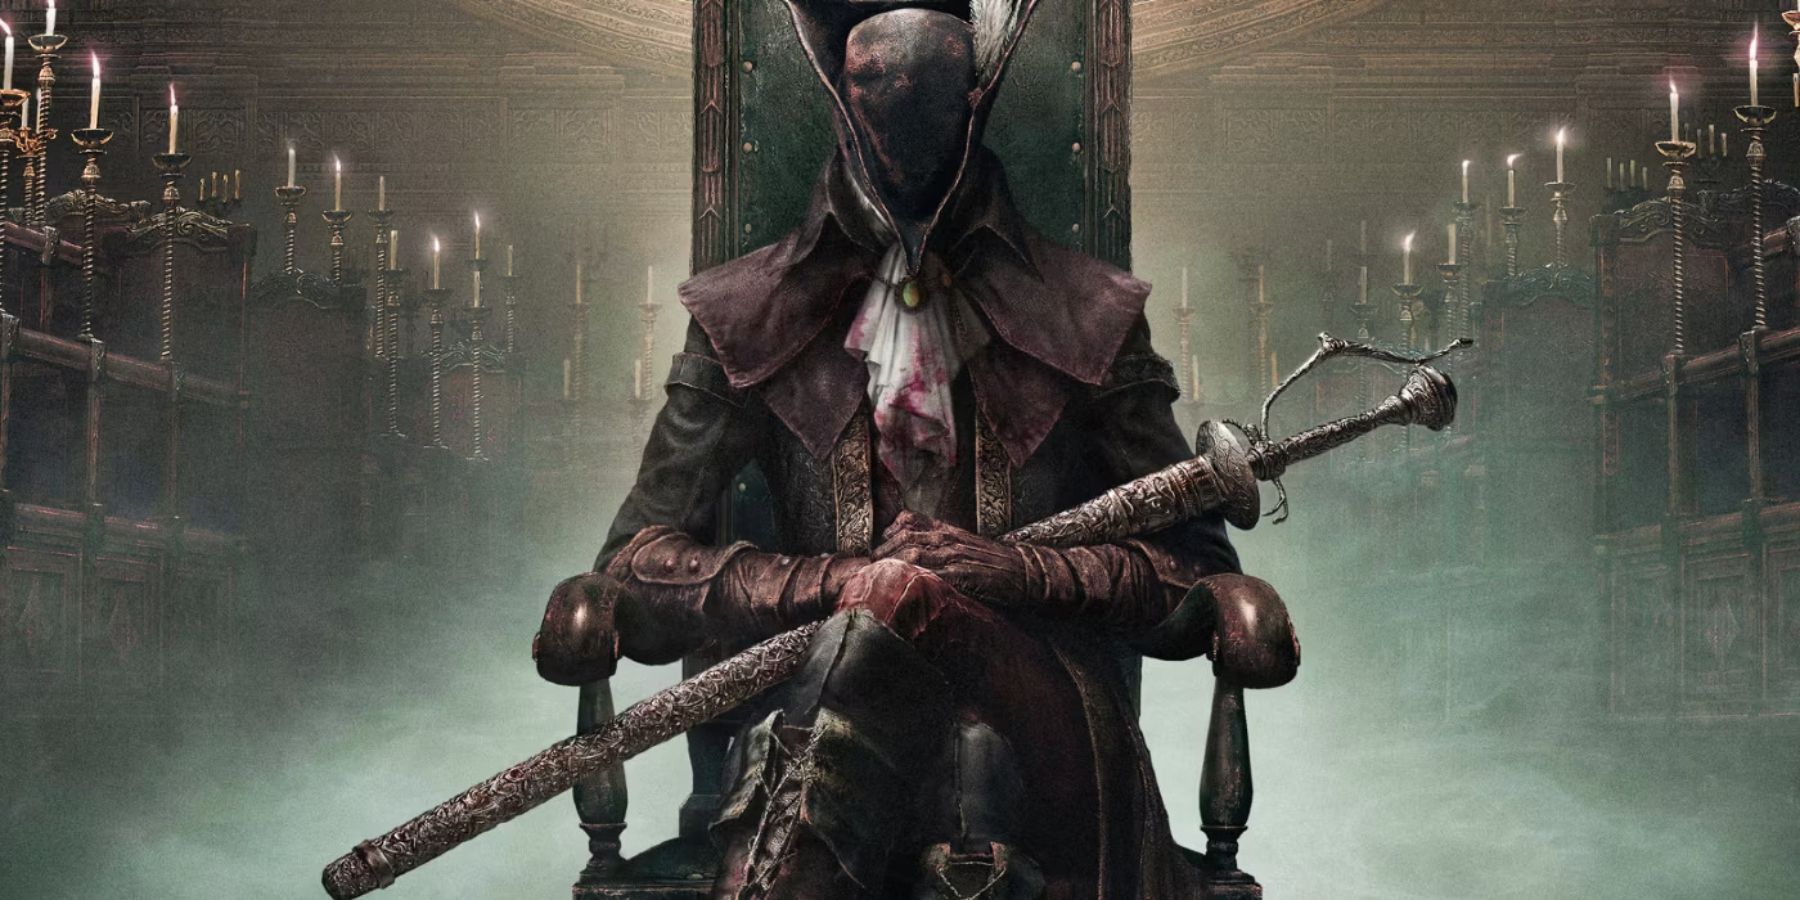 Lies of P Shouldn't Be Shamed For Imitating Bloodborne